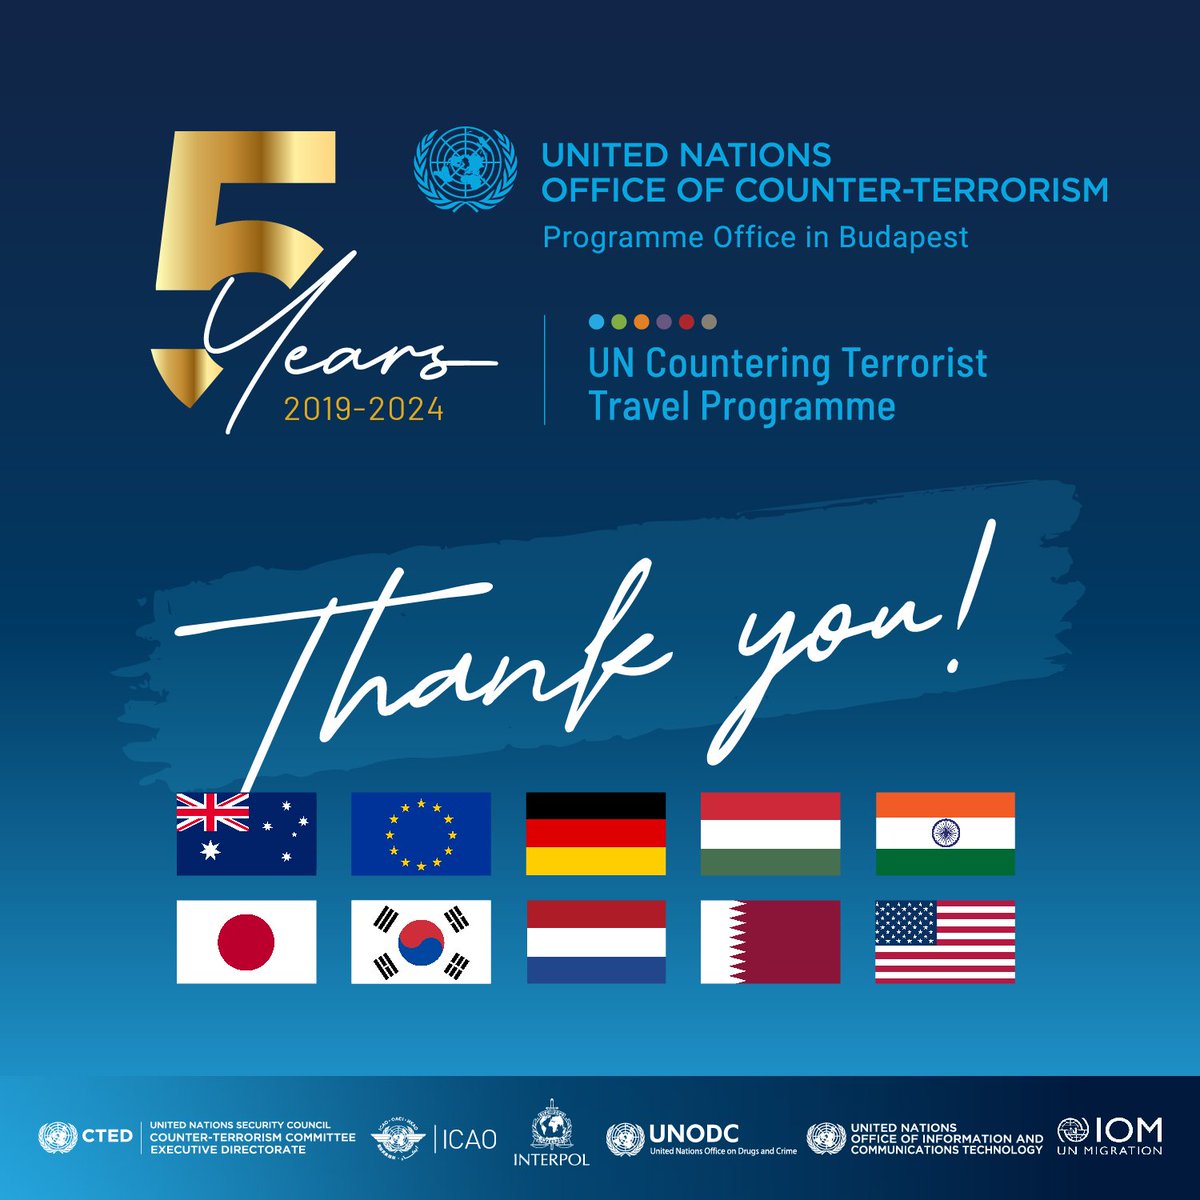 🤝These #CTTravel Programme achievements have been possible thanks to support from #Australia 🇦🇺, #EU 🇪🇺, #Germany 🇩🇪, #Hungary 🇭🇺, #India 🇮🇳, #Japan 🇯🇵, Republic of #Korea 🇰🇷, #Netherlands 🇳🇱, #Qatar 🇶🇦, & #USA 🇺🇸. #UniteToCounterTerrorism